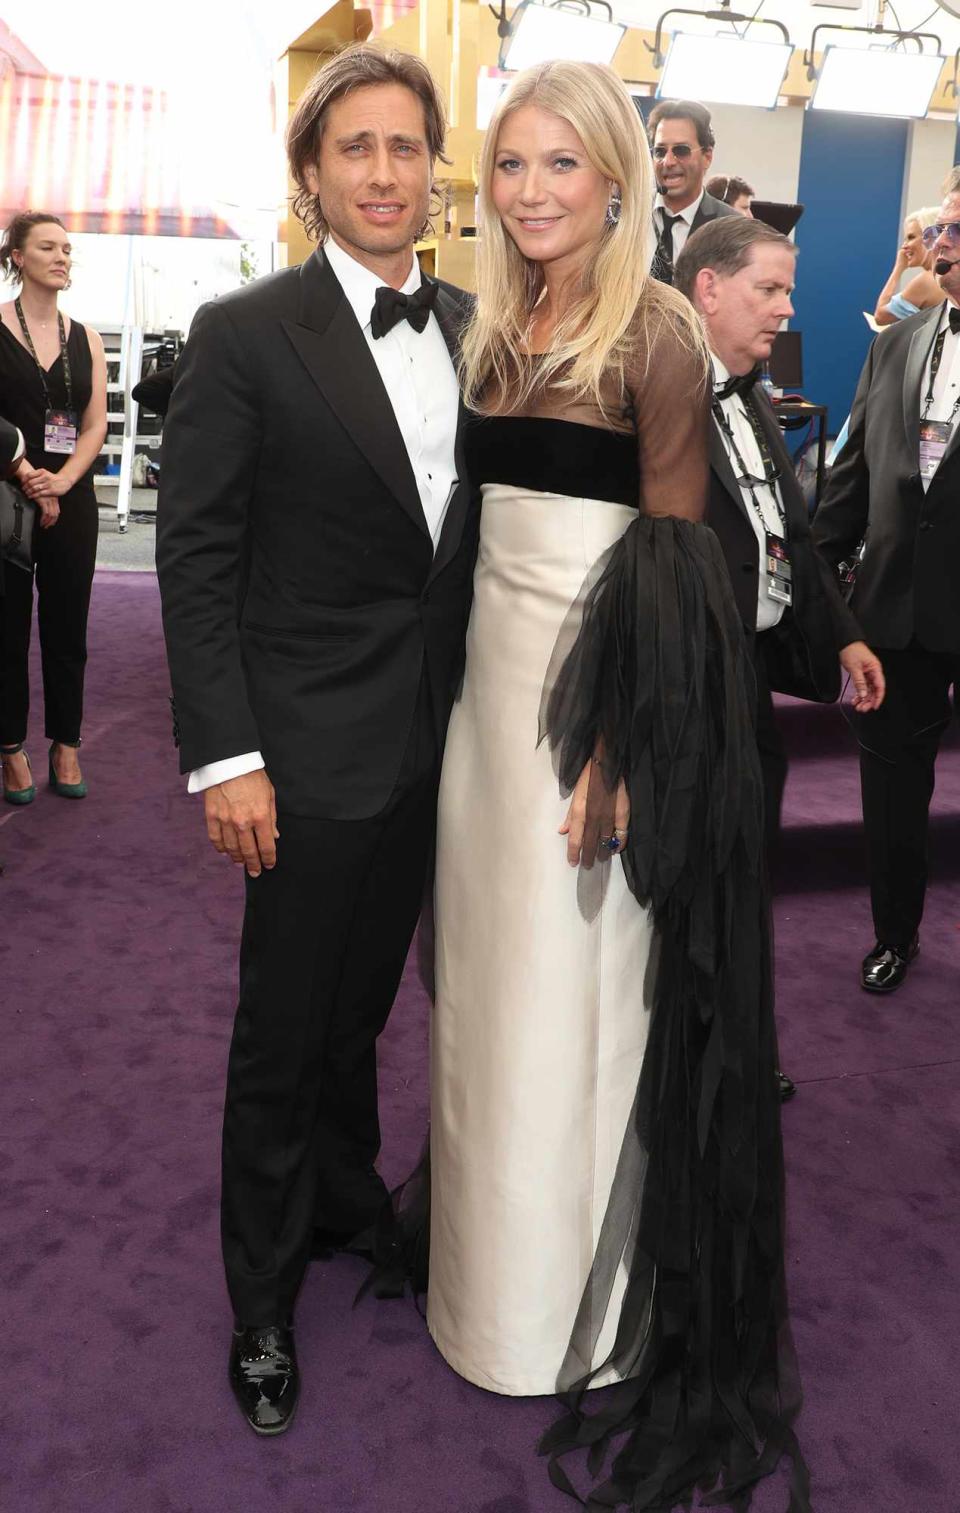 Brad Falchuk and Gwyneth Paltrow attend FOXS LIVE EMMY RED CARPET ARRIVALS during the 71ST PRIMETIME EMMY AWARDS airing live from the Microsoft Theater at L.A. LIVE in Los Angeles on Sunday, September 22 (7:00-8:00 PM ET live/4:00-5:00 PM PT live) on FOX